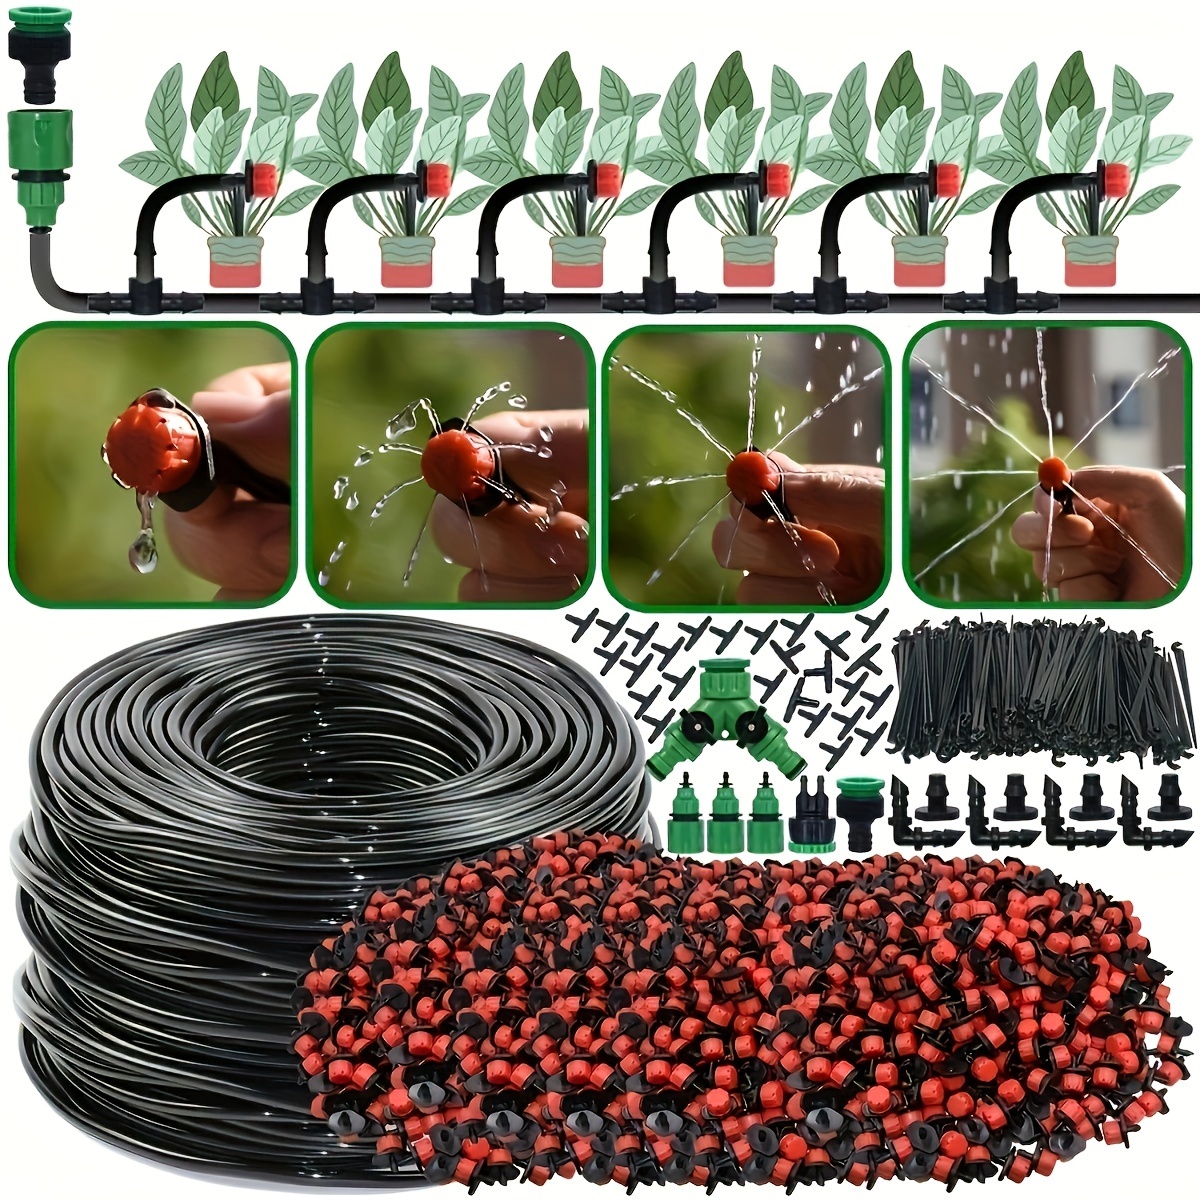 

1 Pack, 100ft/65ft/33ft Micro Drip Irrigation Kit, Diy Garden Automatic Watering System With Adjustable Drippers, Plastic 4/7'' Hose Set For Greenhouses Lawn Flower Bed Patio